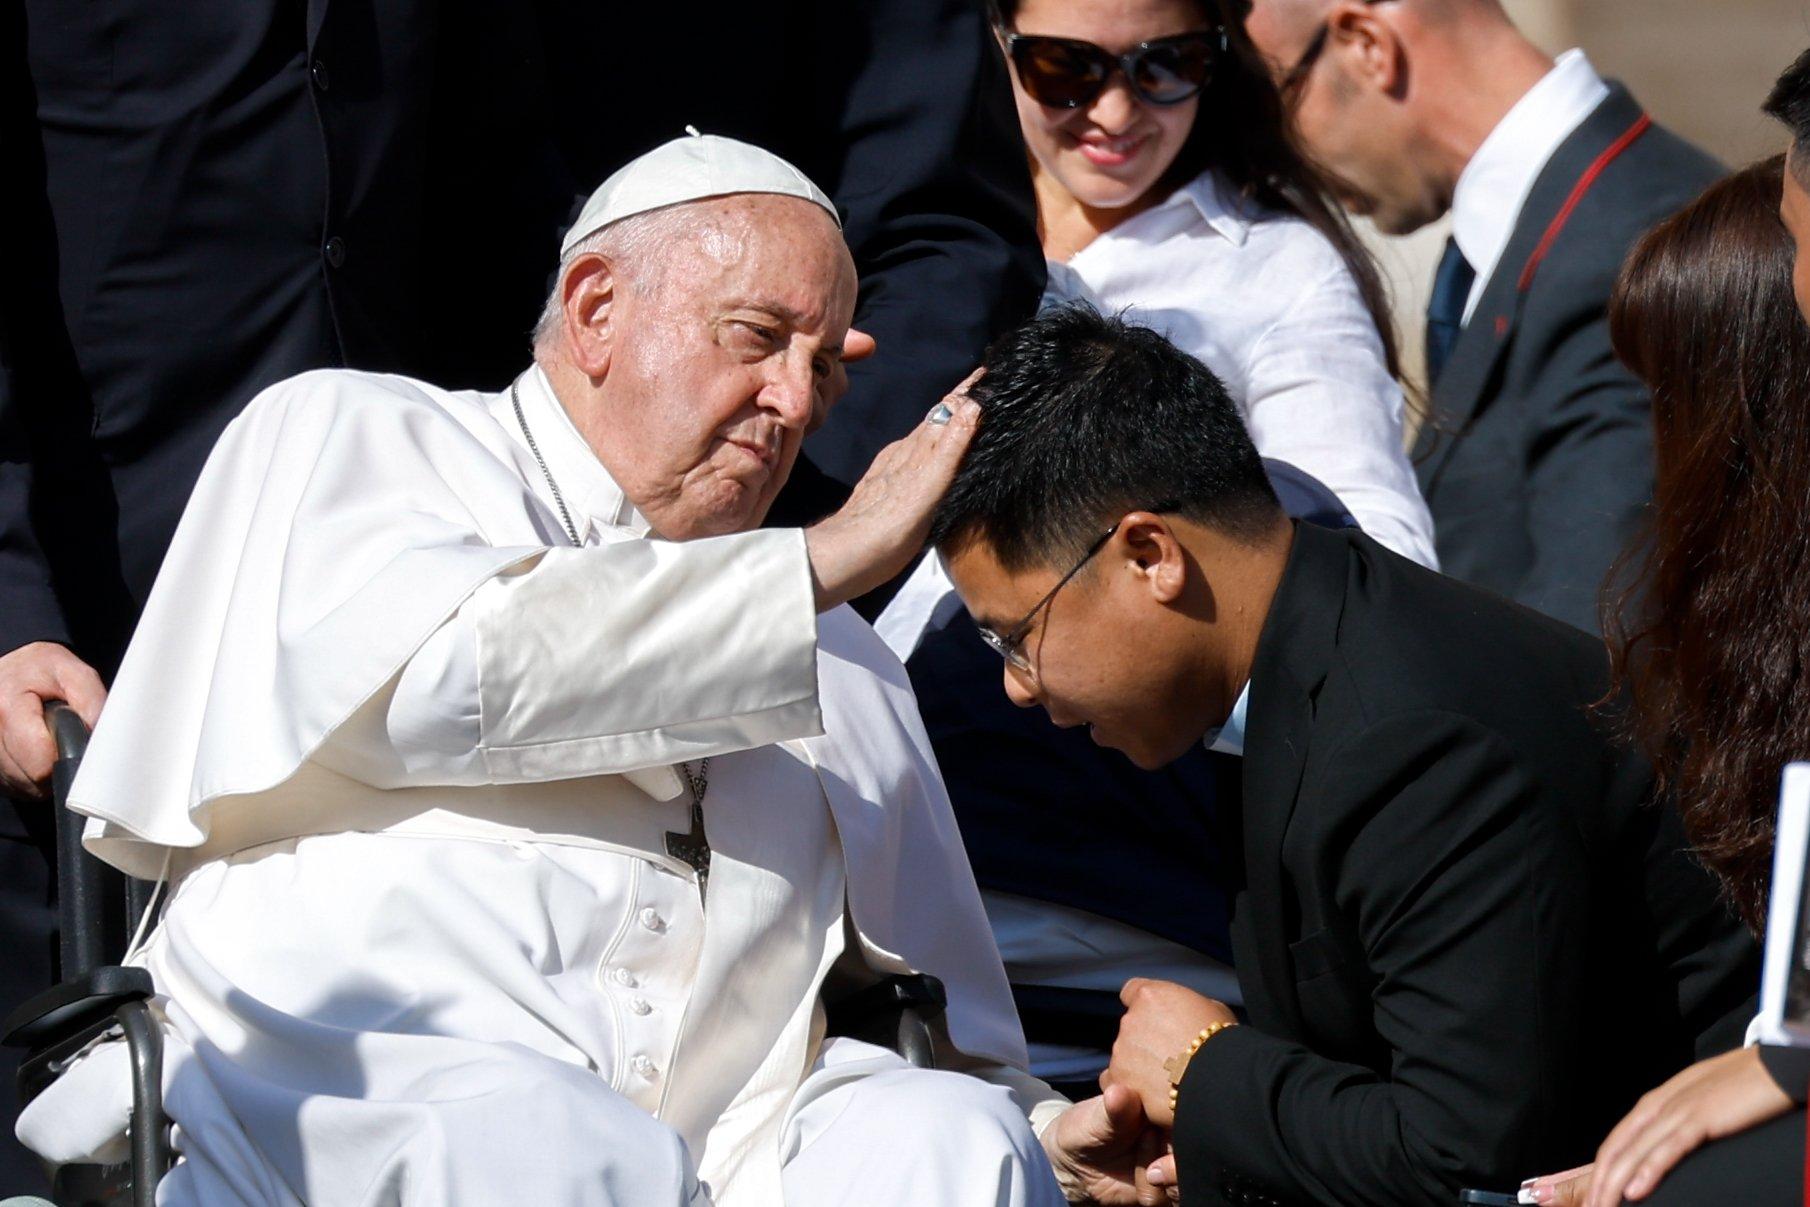 Pope Francis blesses young man